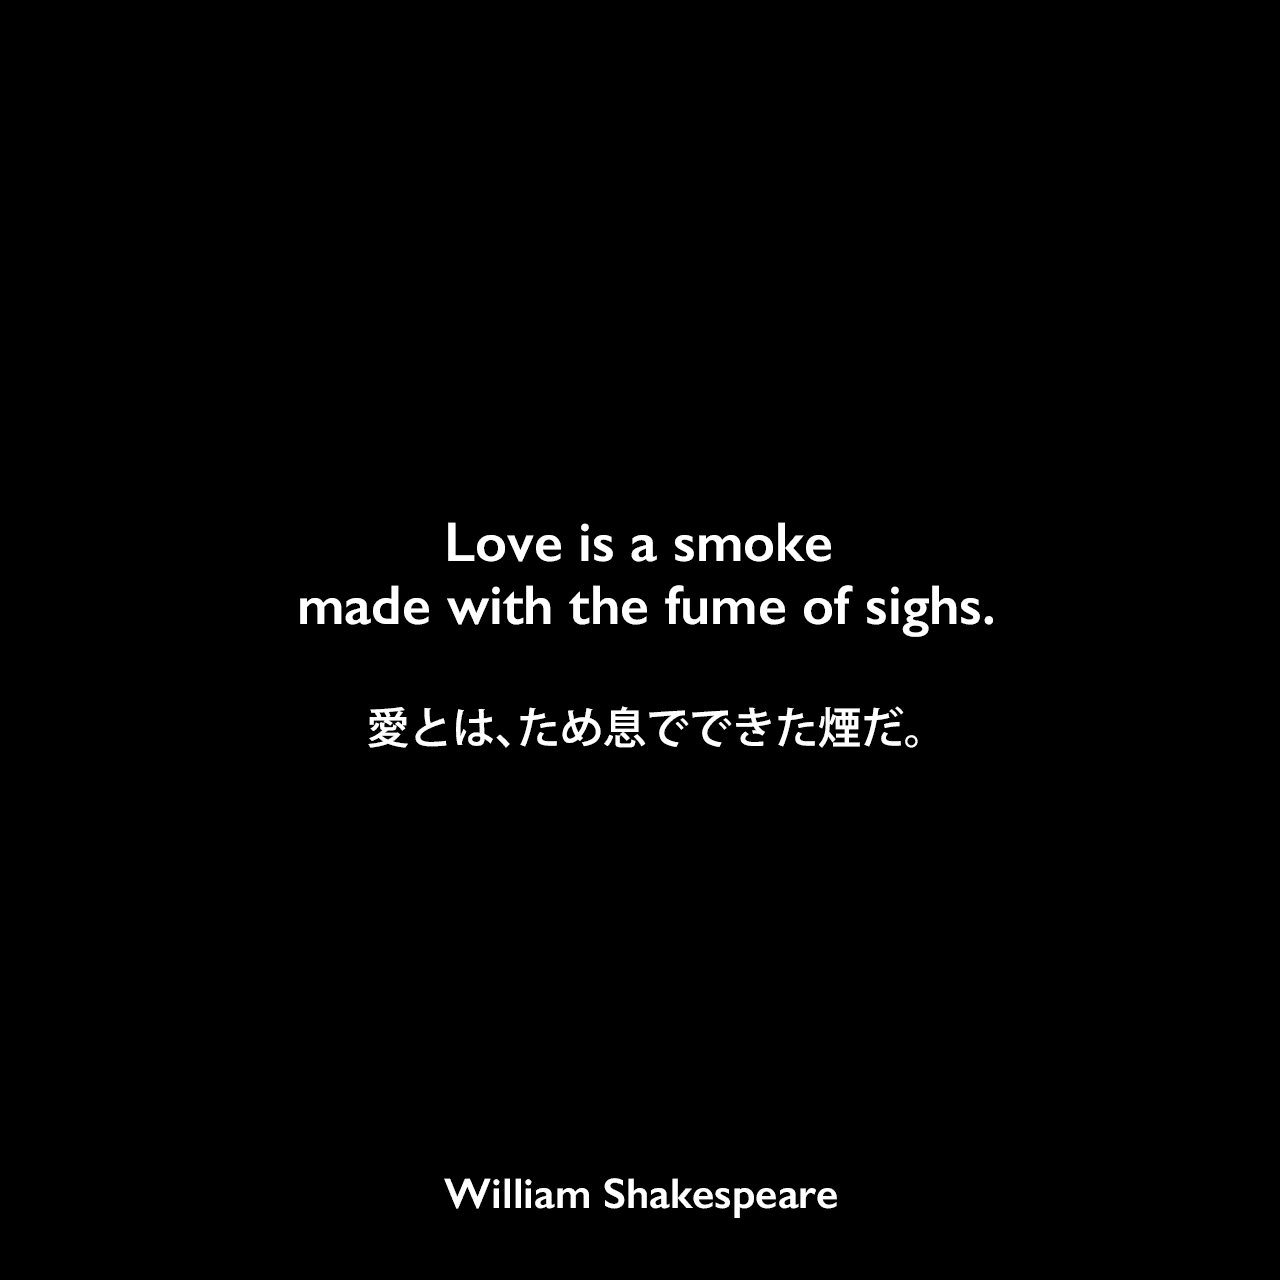 Love is a smoke made with the fume of sighs.愛とは、ため息でできた煙だ。William Shakespeare